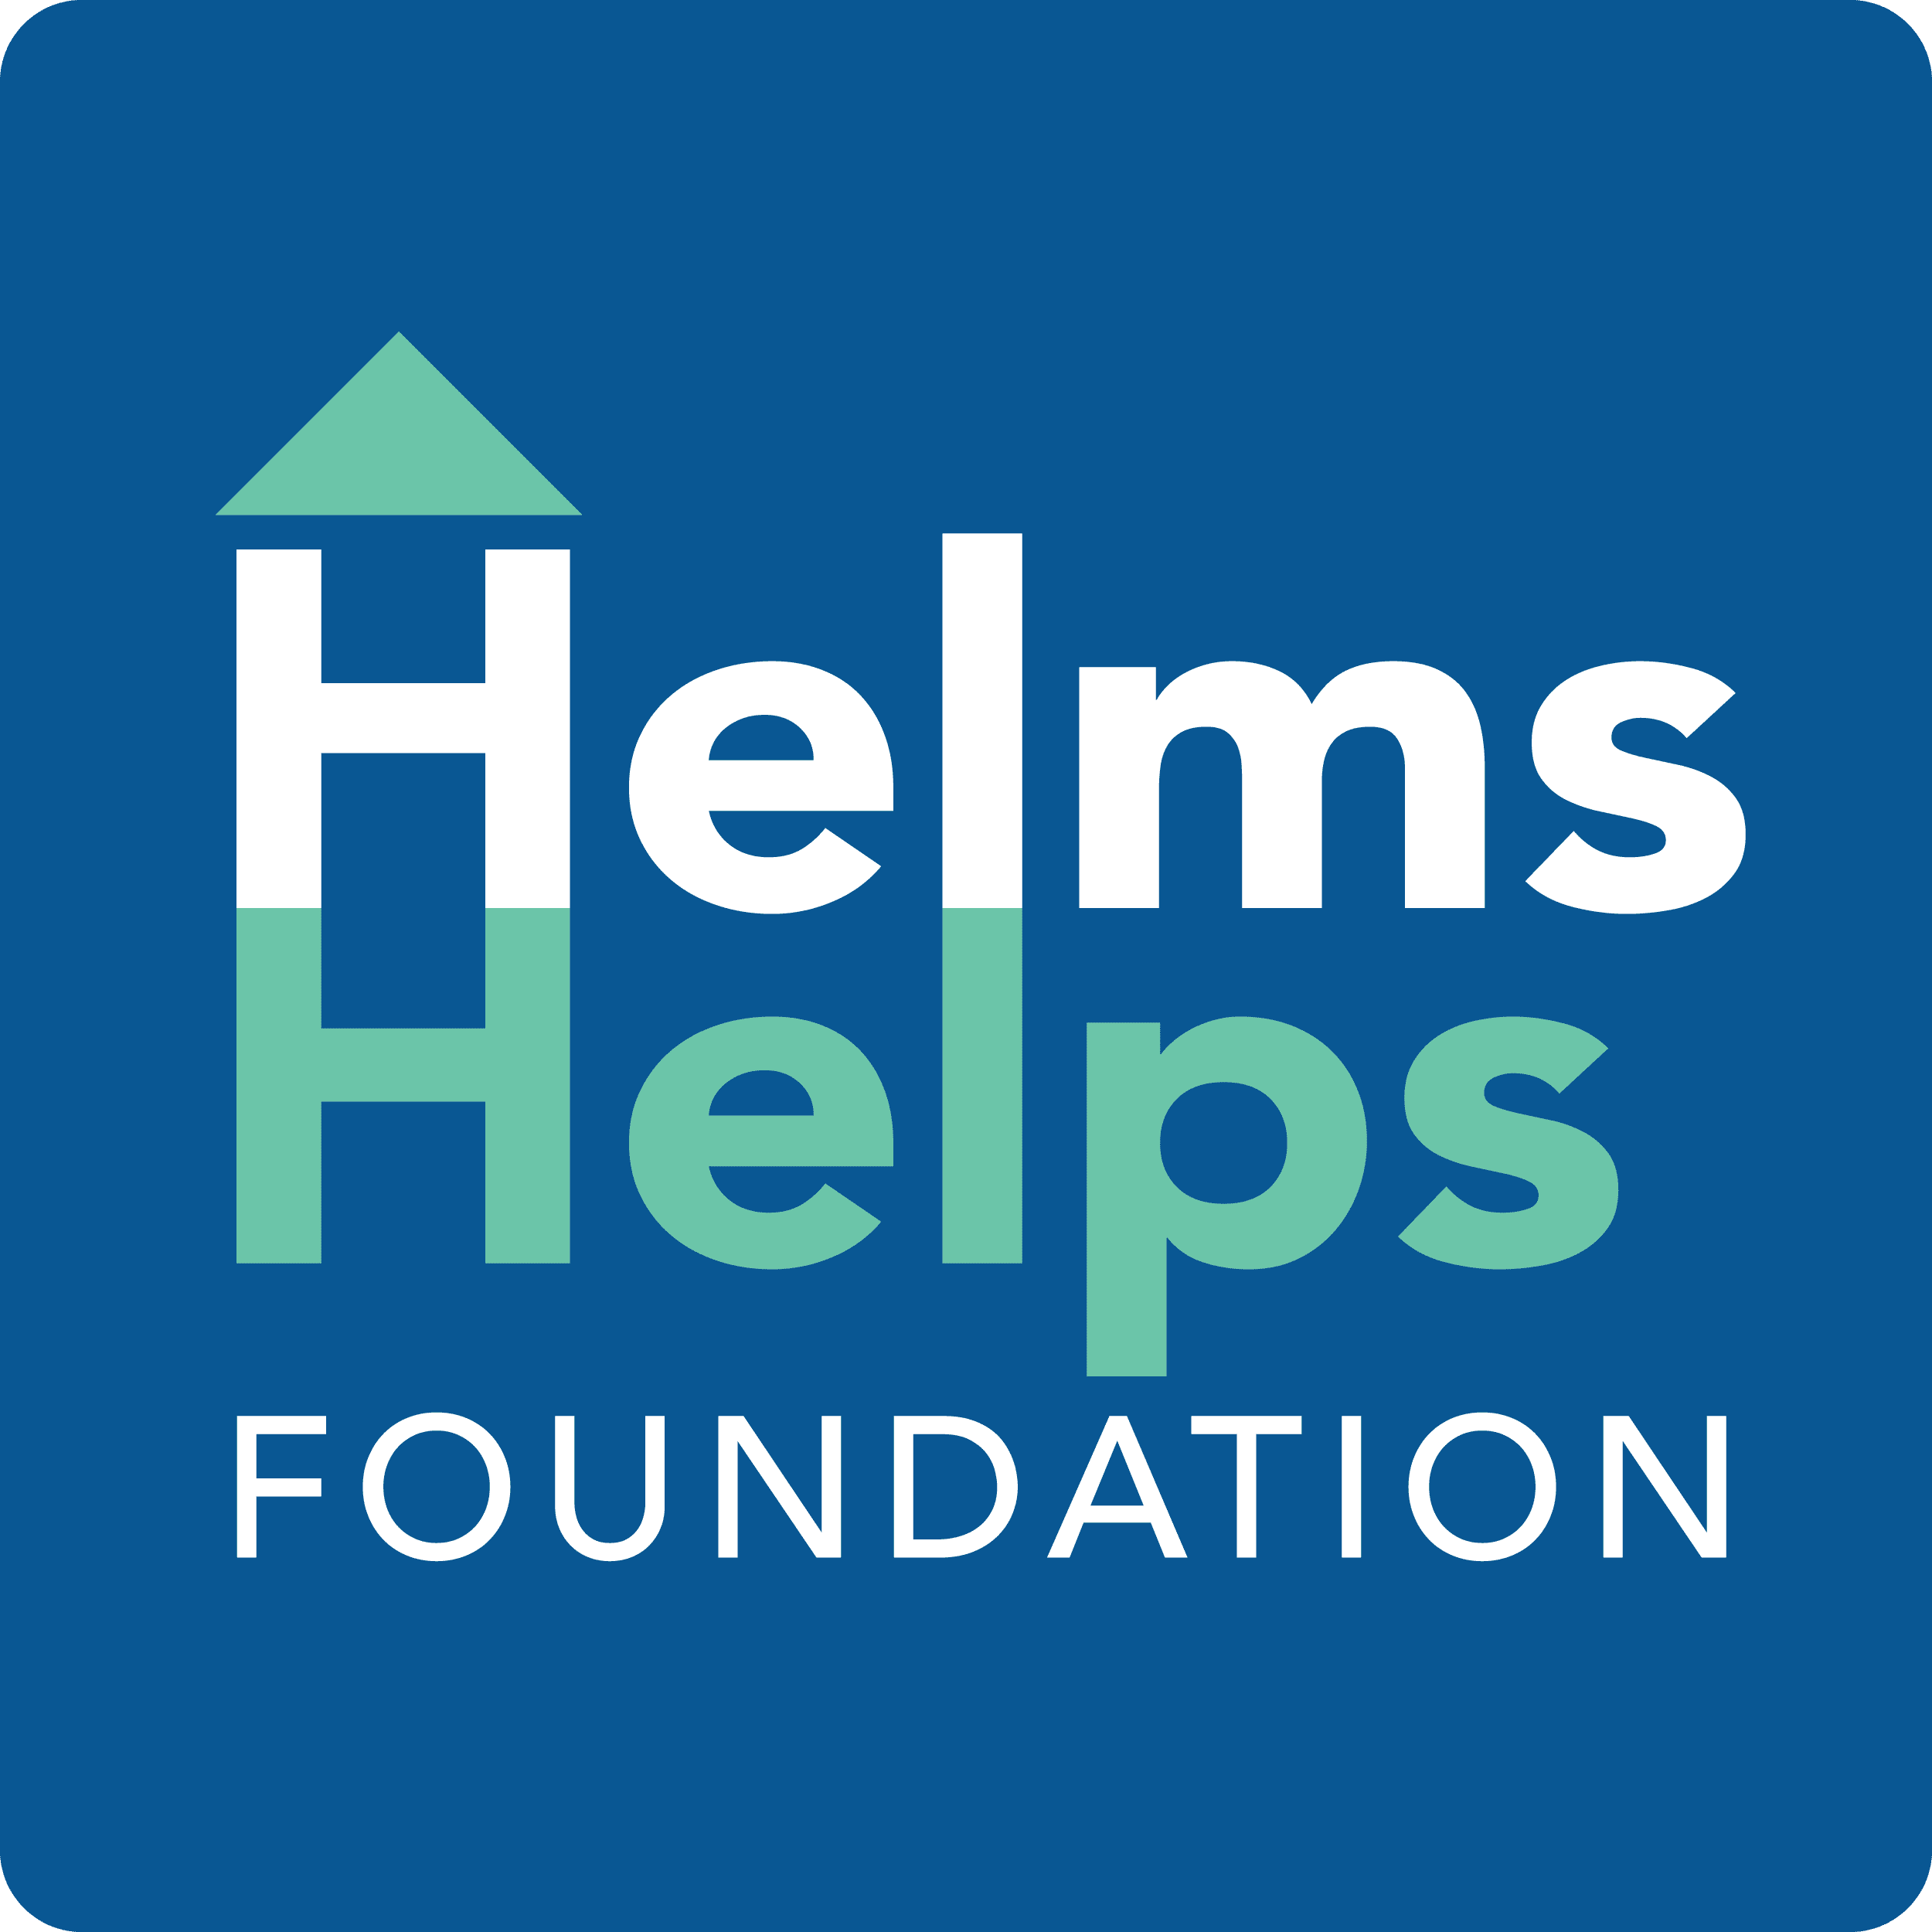 Helms Helps Foundation matches $20,000 of donations! Thank you all.